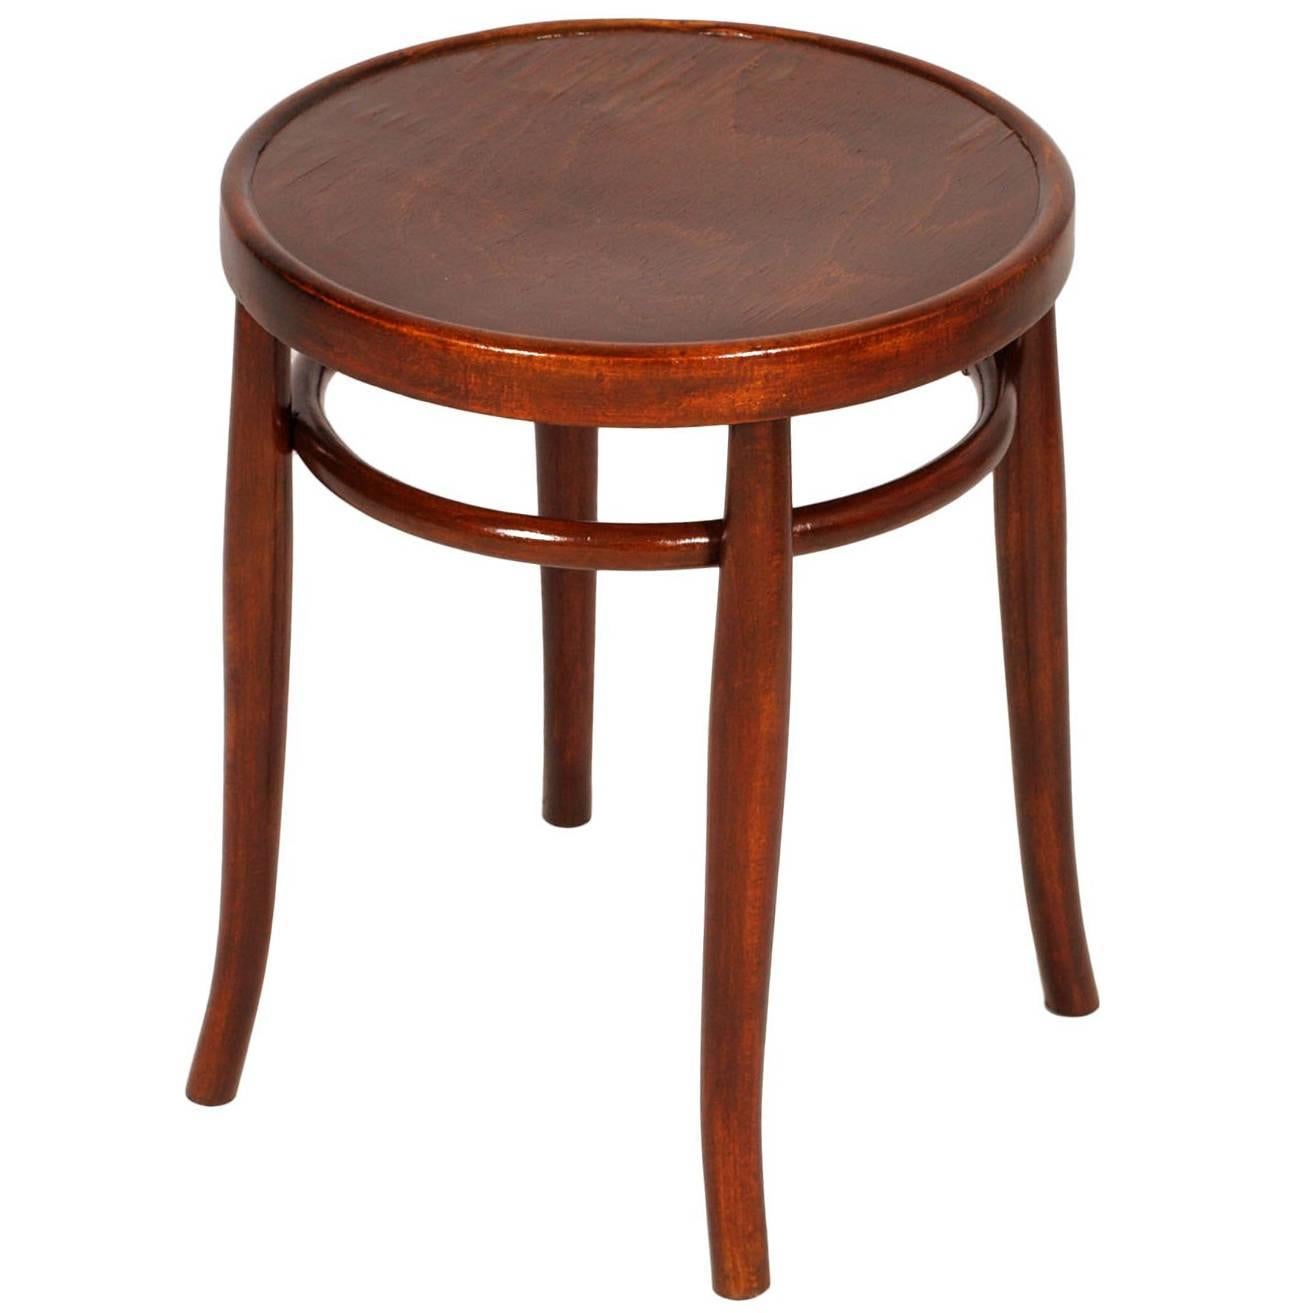 Early 20th Century Round Bentwood Coffee Table by Thonet Polished to Wax